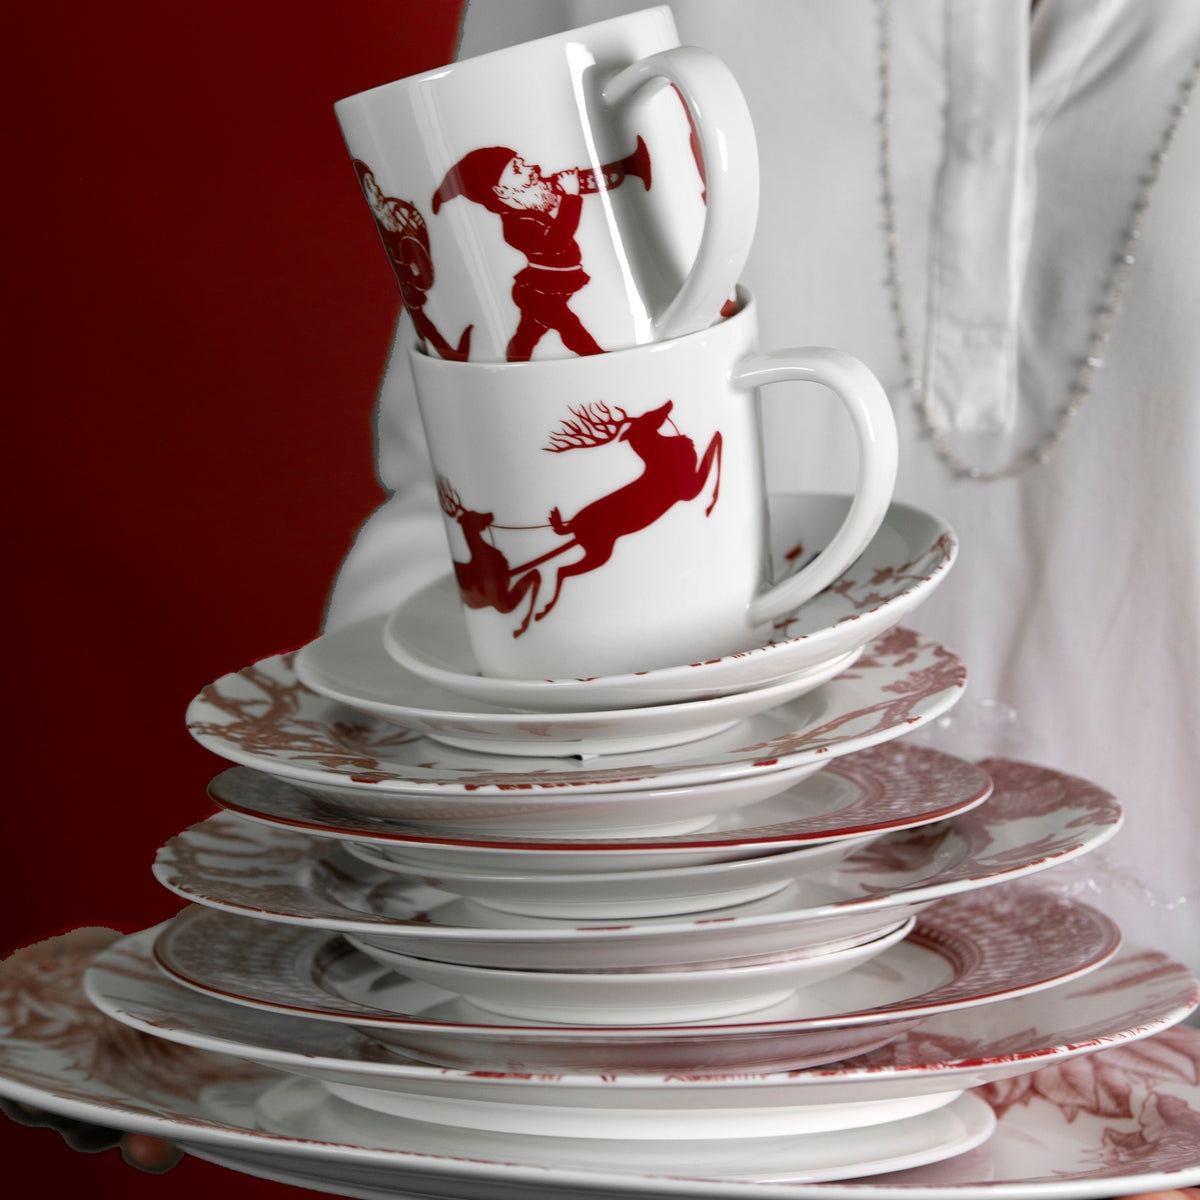 A stack of Elves Mugs with reindeer and Santa Claus designs, part of a festive holiday collection by Caskata Artisanal Home, held by a person in a white garment.